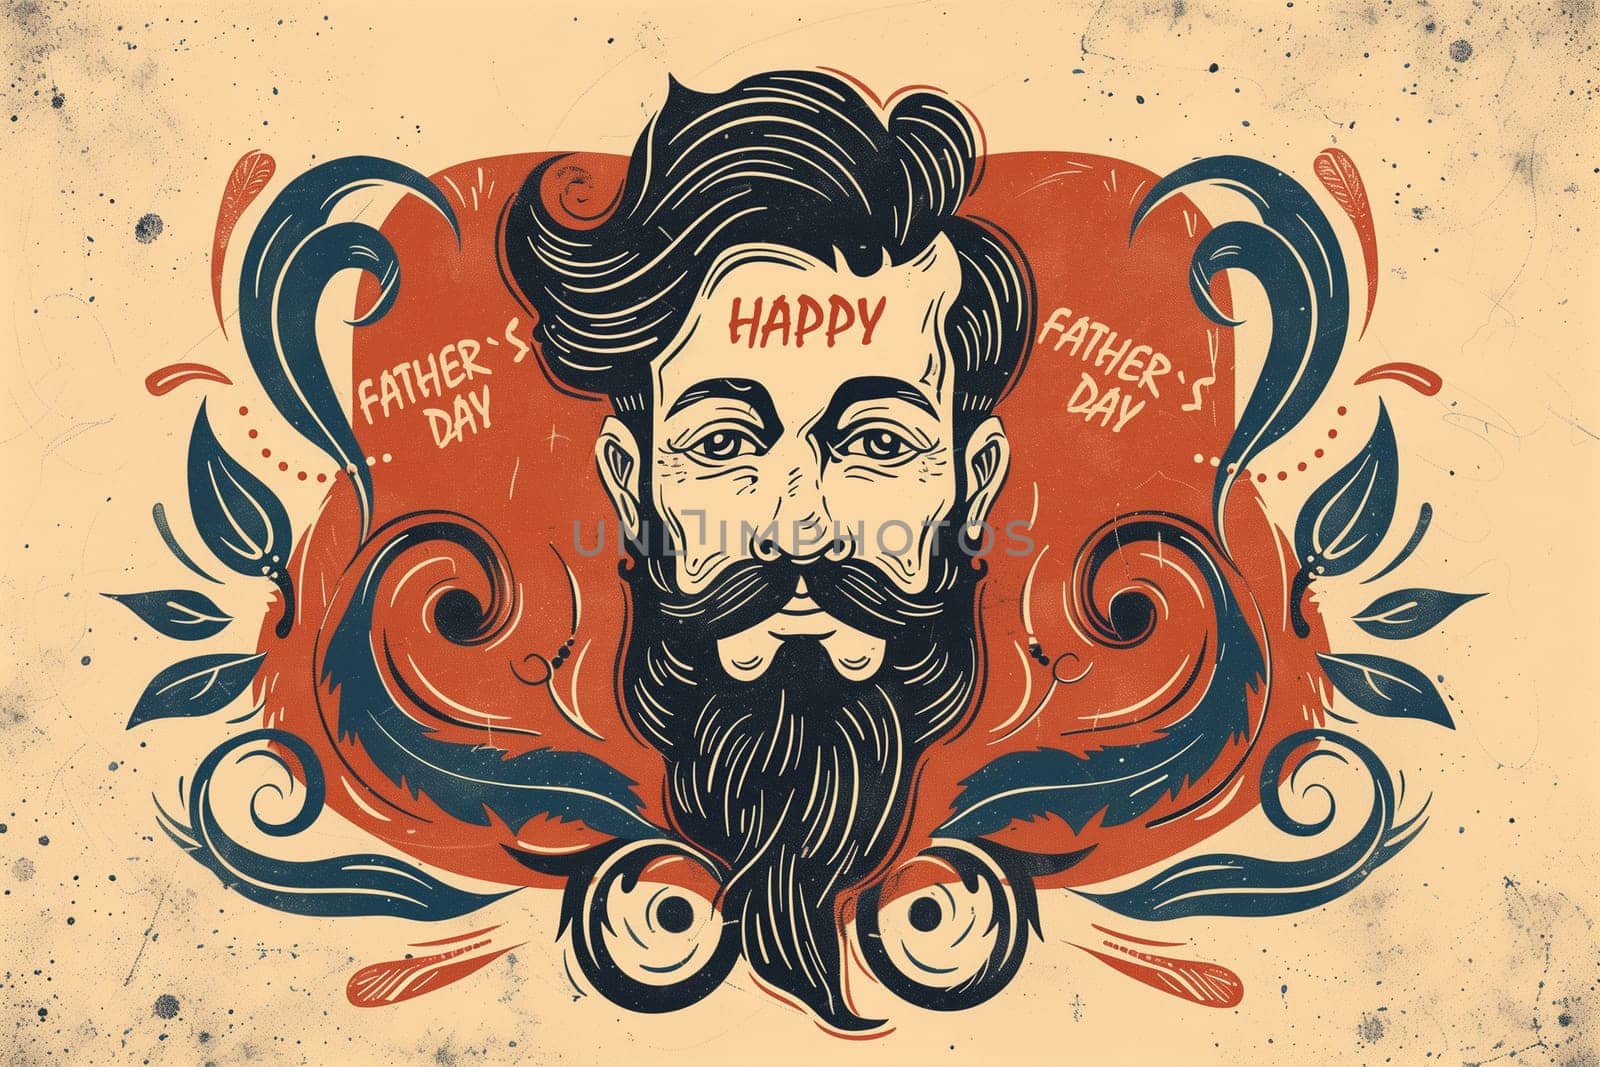 Vibrant Illustration Celebrating Fathers Day With Stylized Bearded Man and Festive Decorations by Sd28DimoN_1976